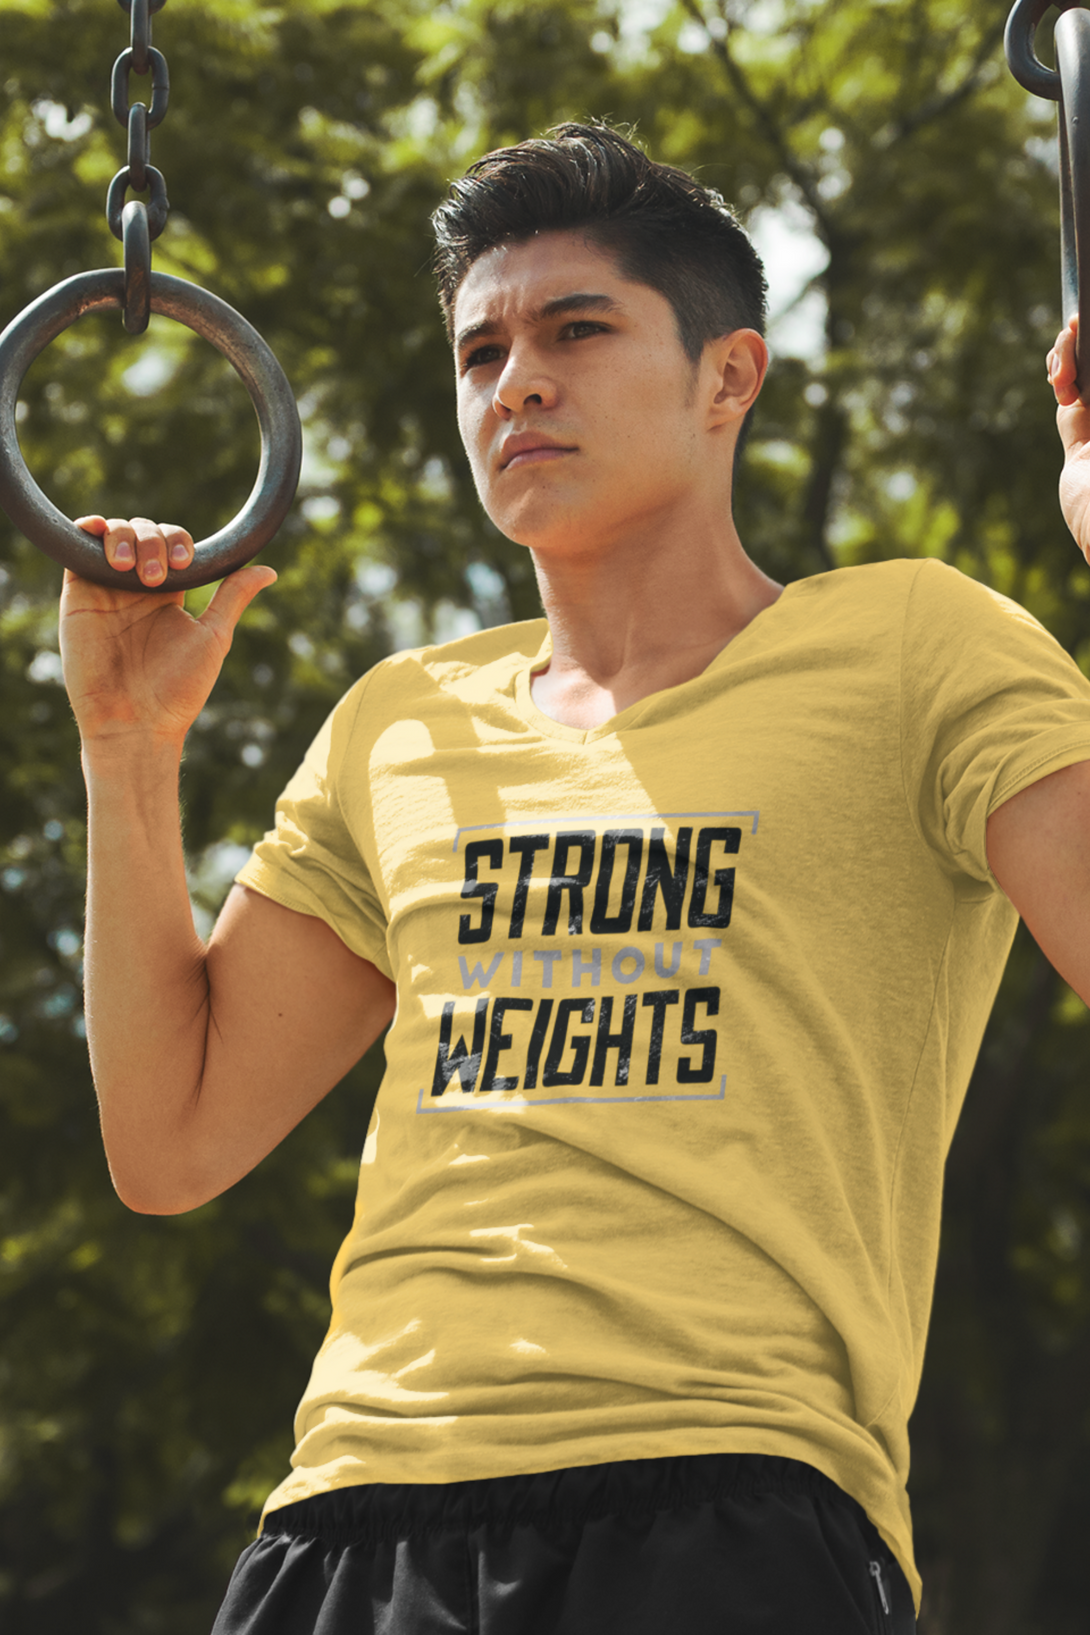 Strong Without Weights Printed T-Shirt For Men - WowWaves - 2